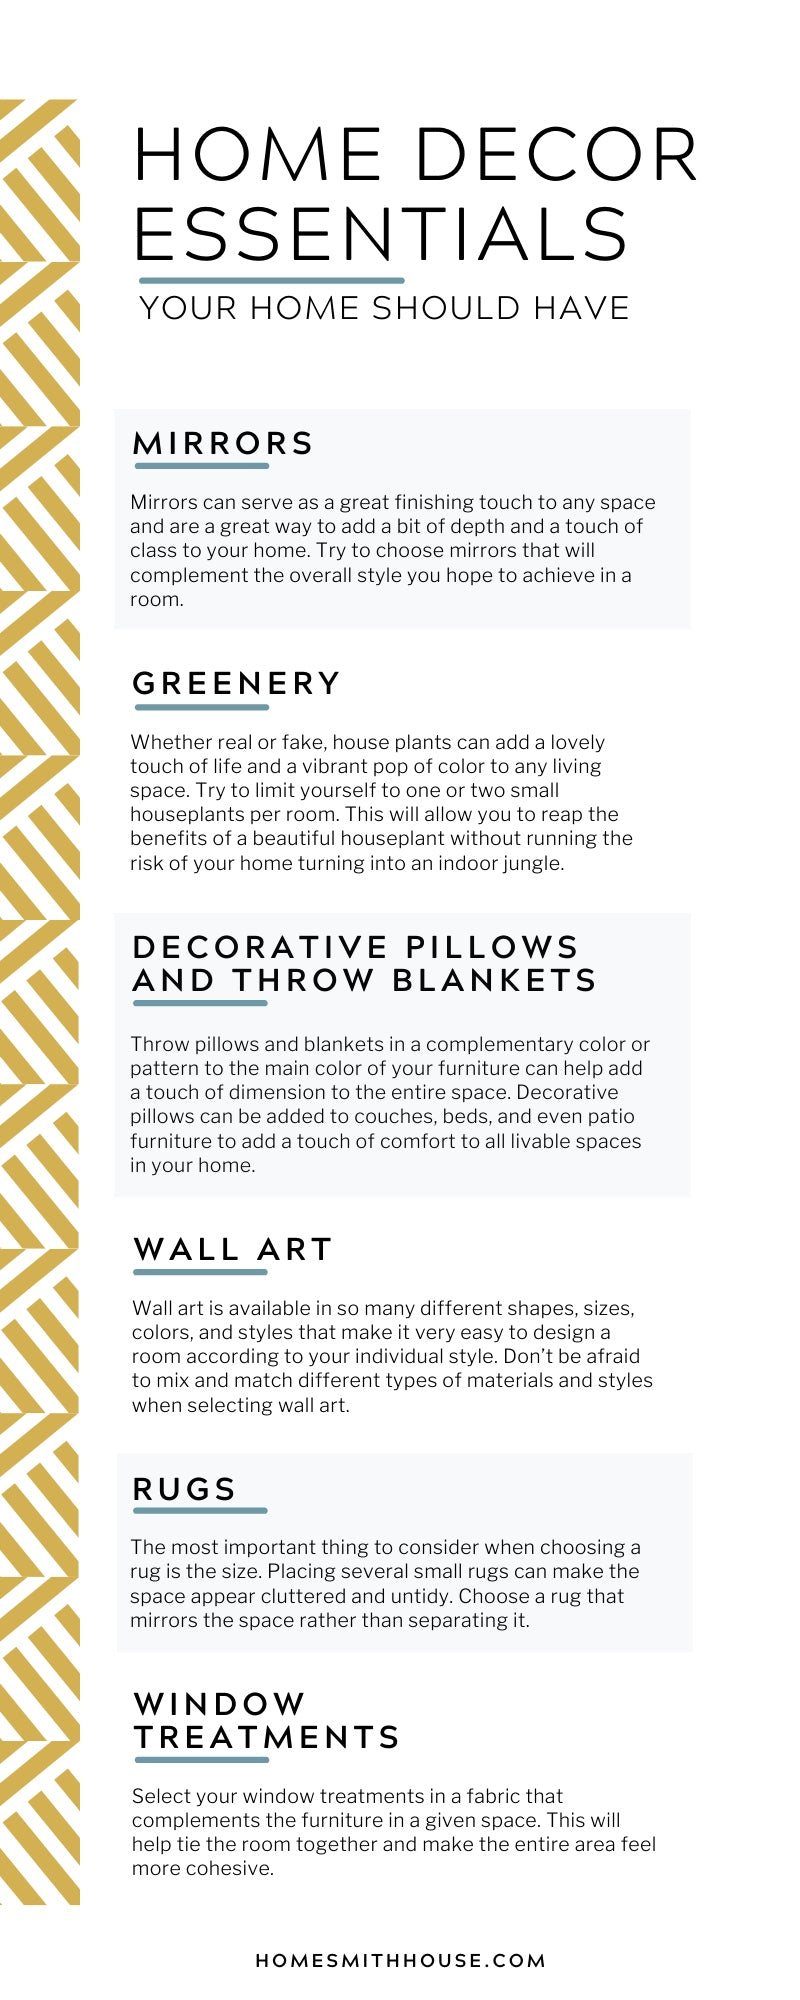 Home Decor Essentials Your Home Should Have